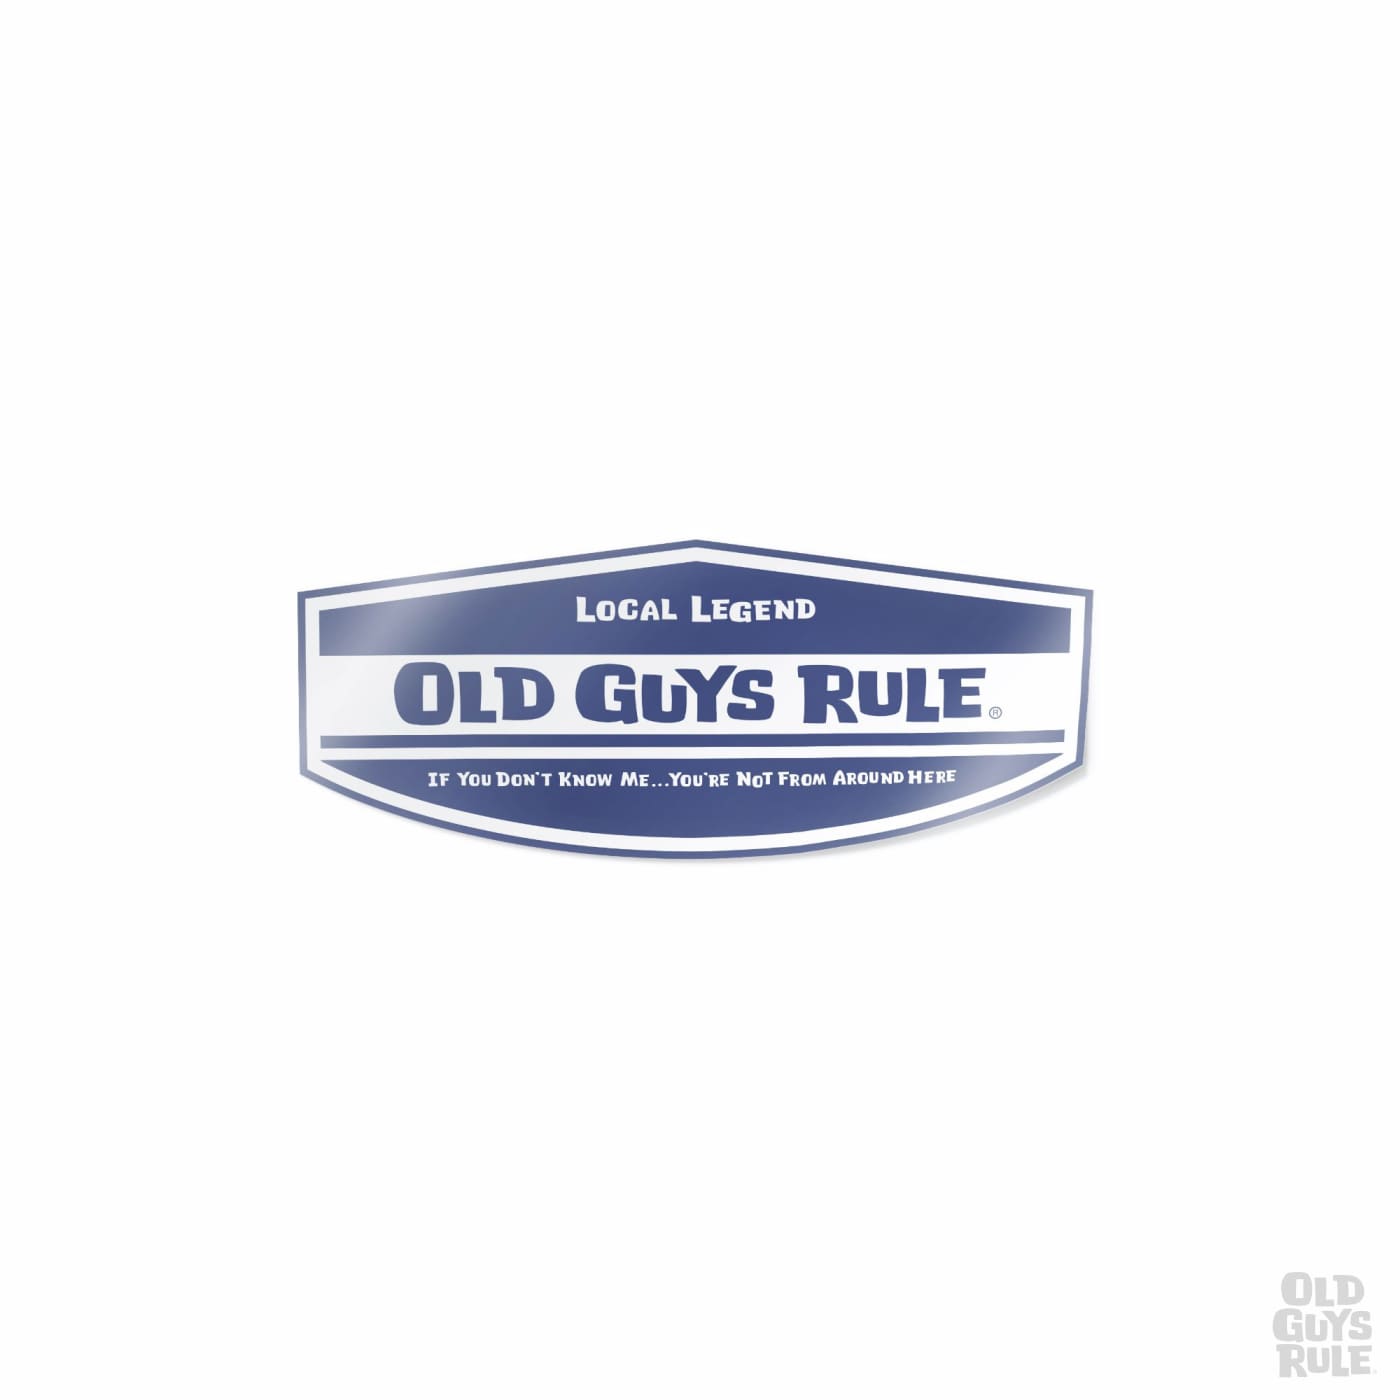 Old Guys Rule Local Legend Decal